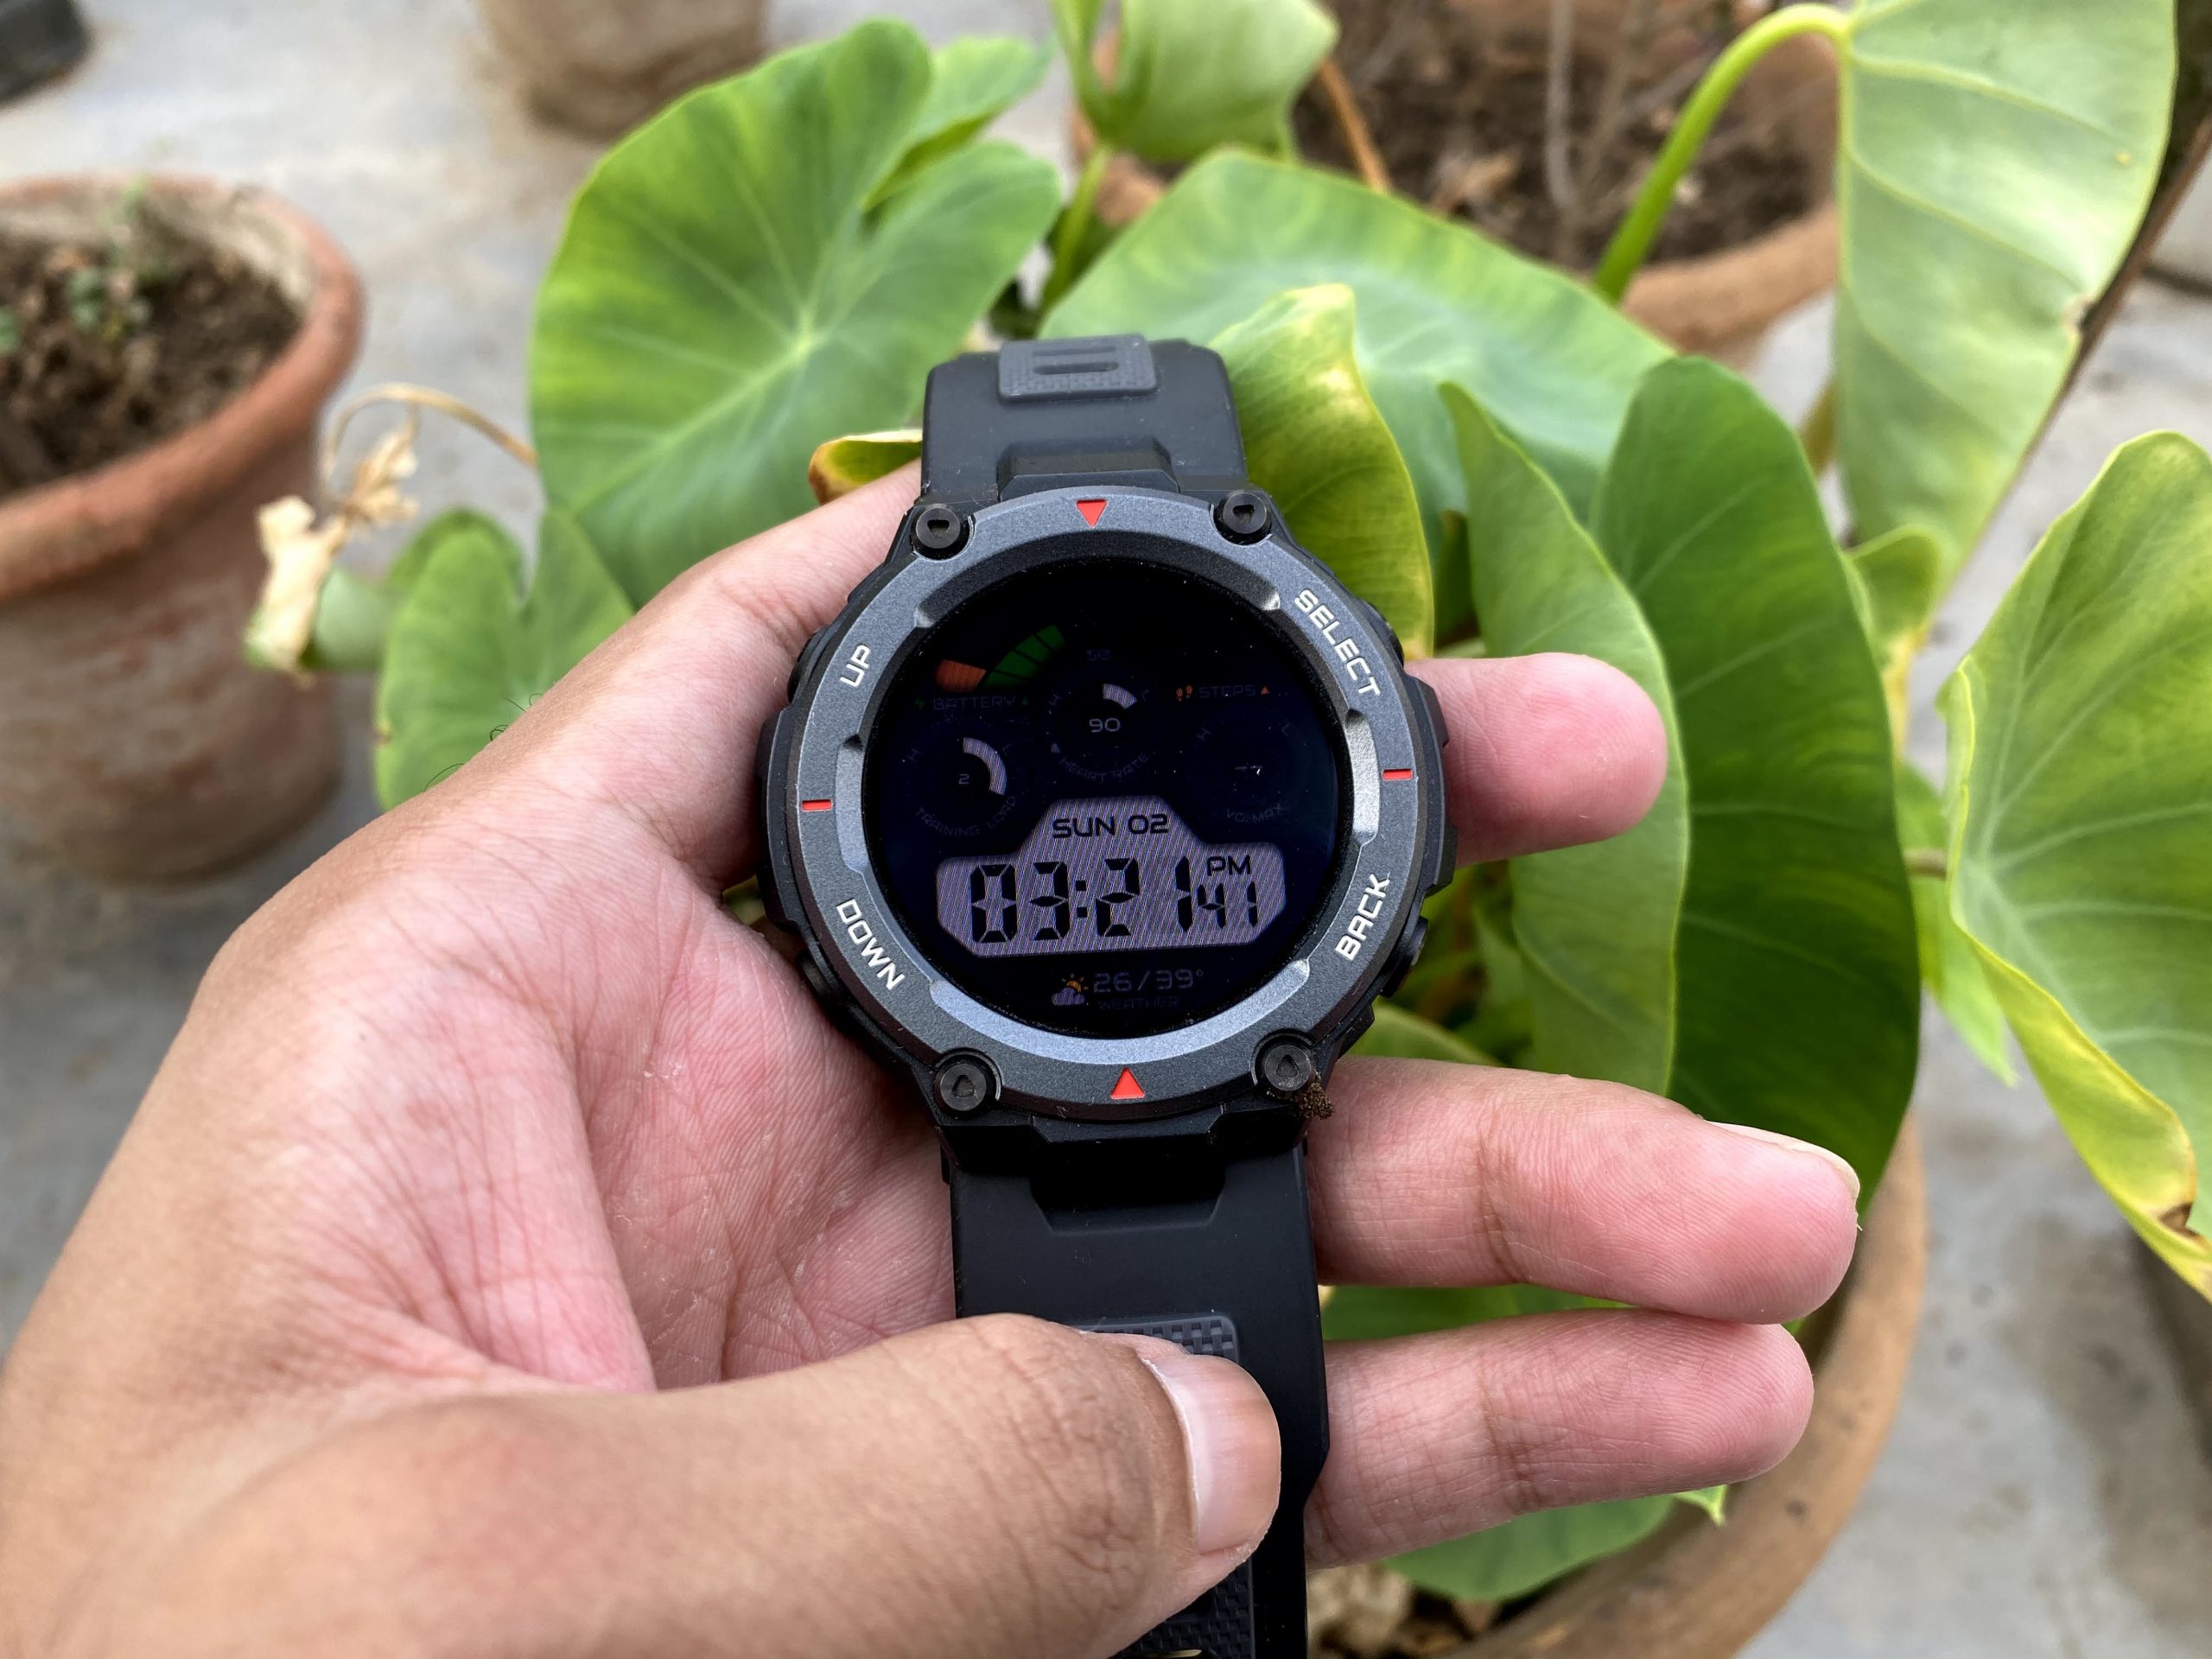 Amazfit T-rex Pro vs T-rex 2 vs T-rex Ultra - What's the Difference?